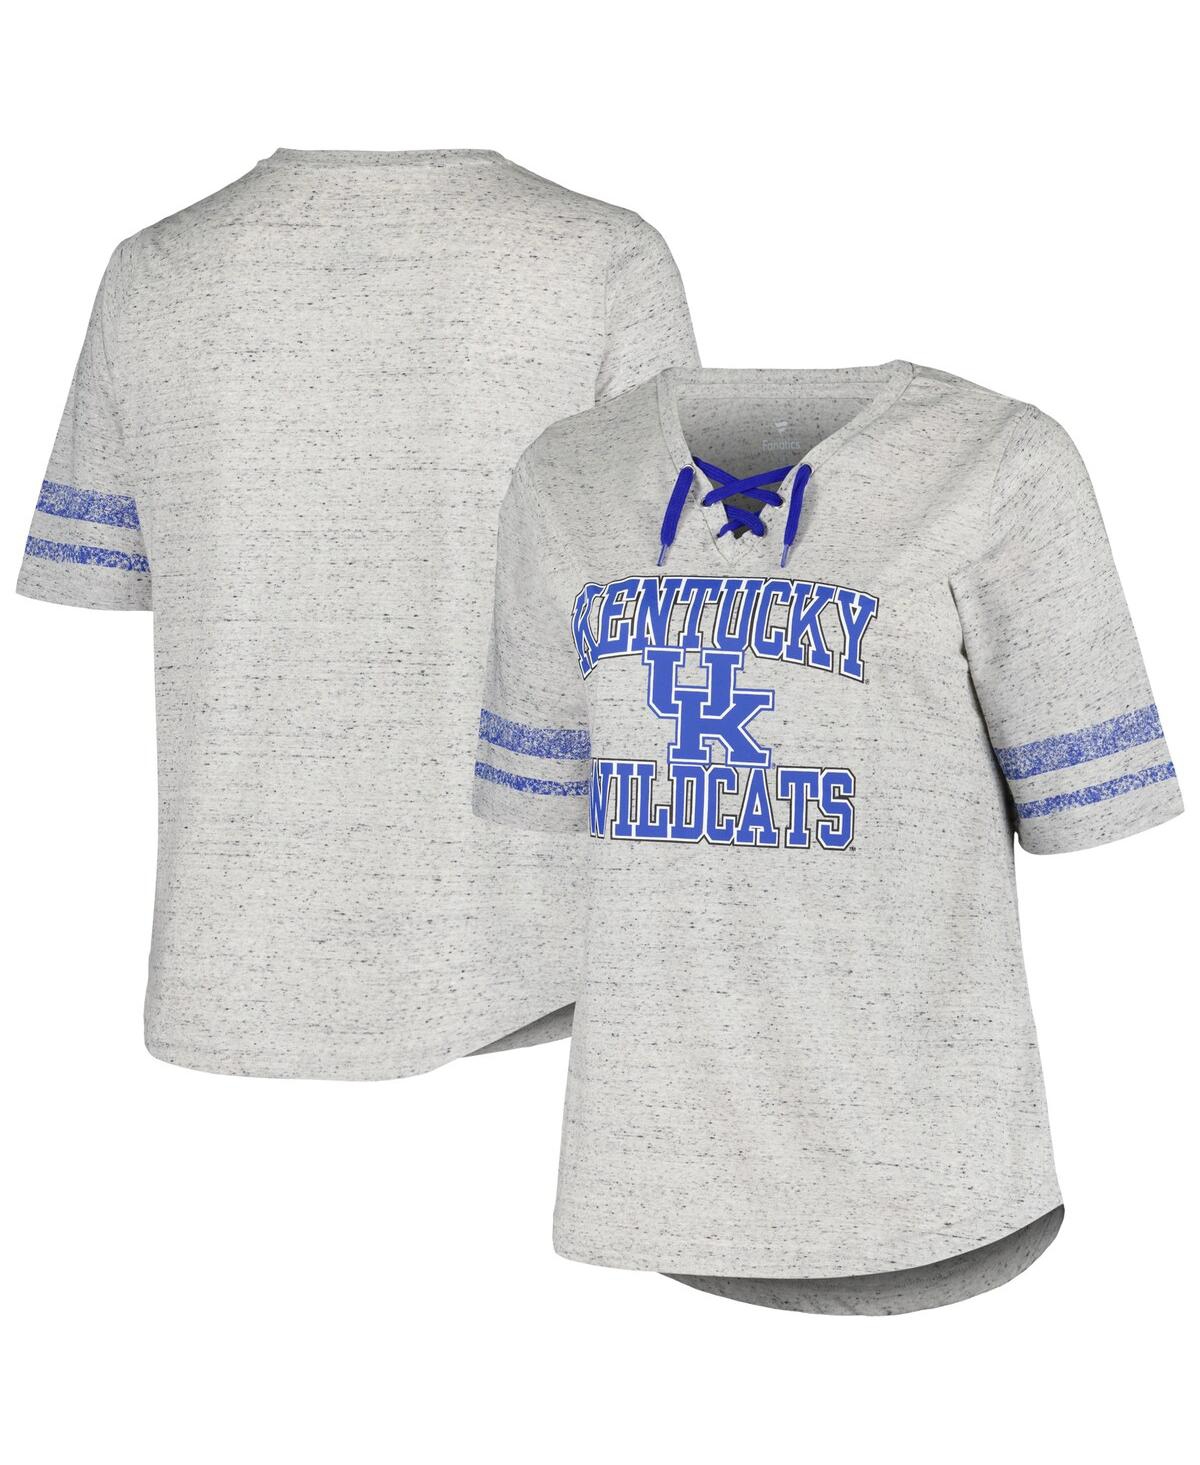 Women's Profile Heather Gray Distressed Kentucky Wildcats Plus Size Striped Lace-Up T-shirt - Heather Gray